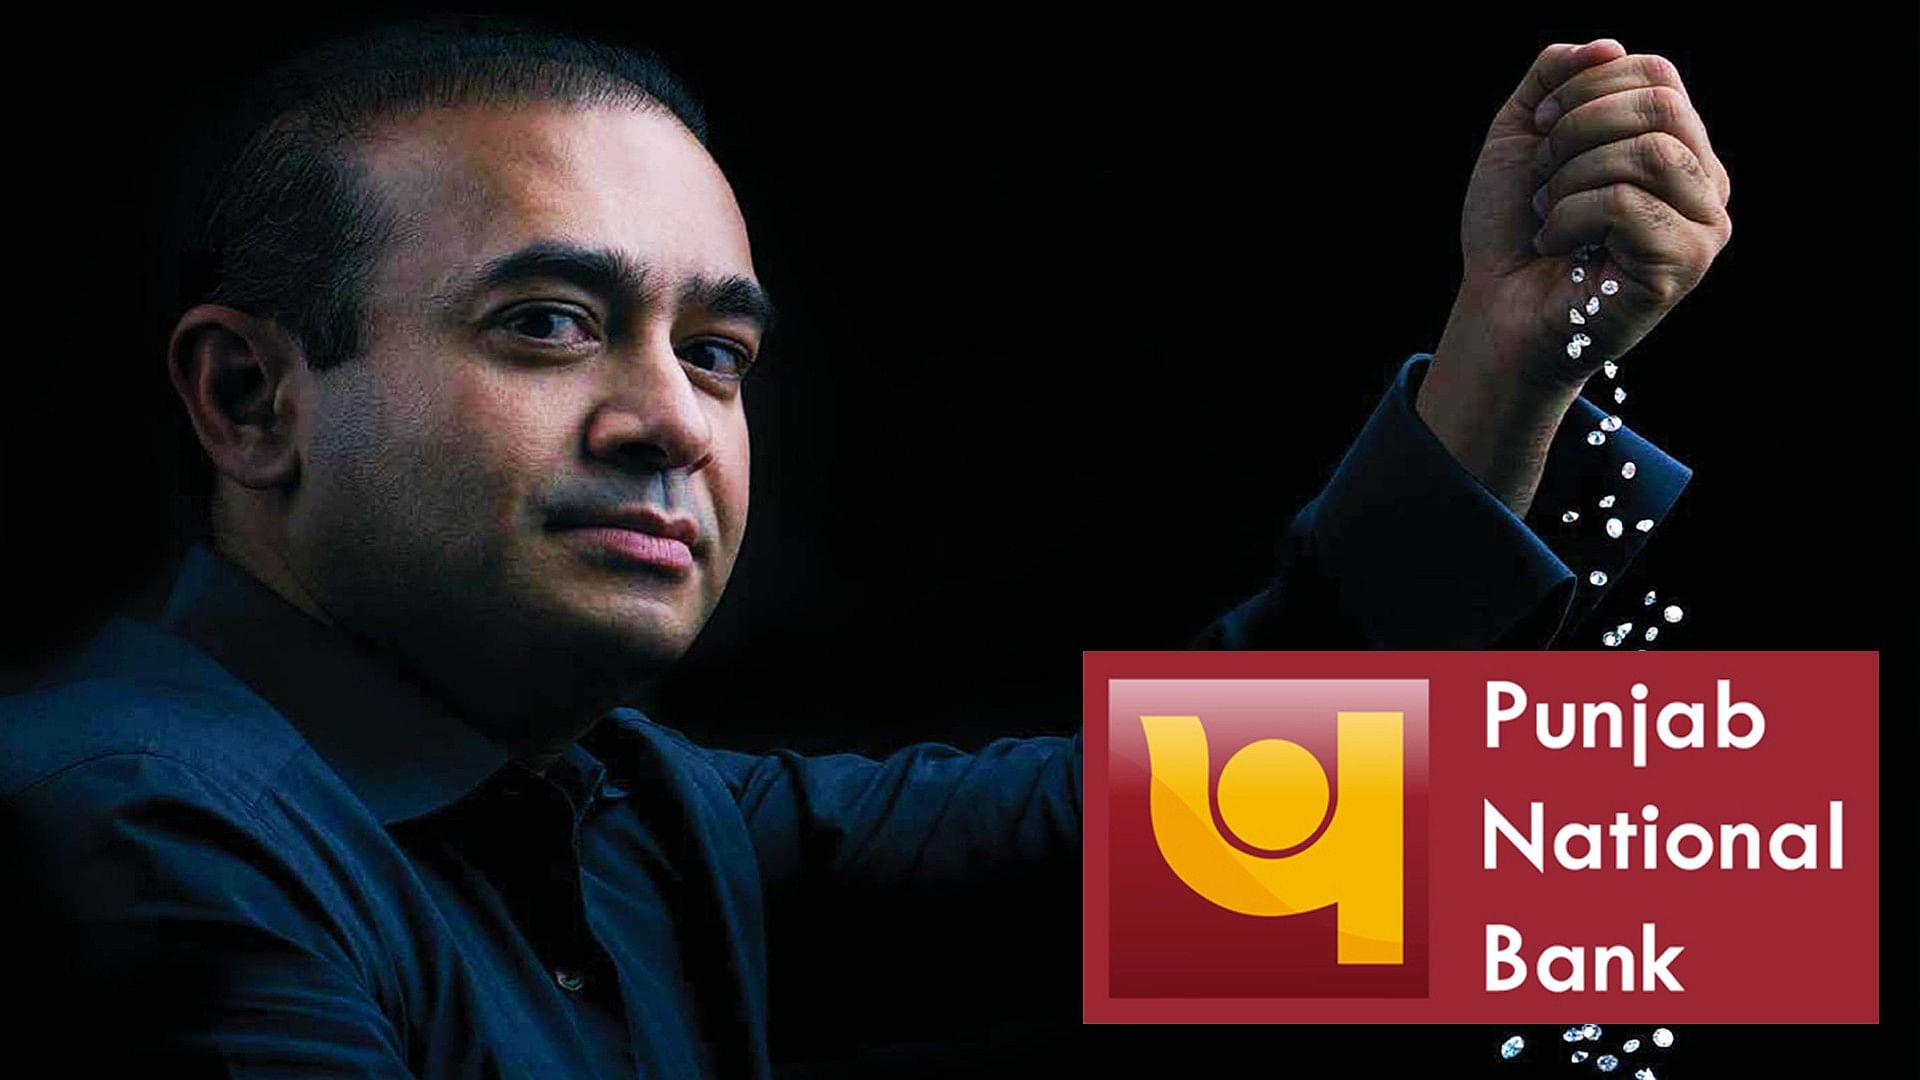 Nirav Modi is an accused in the Punjab National Bank scam.